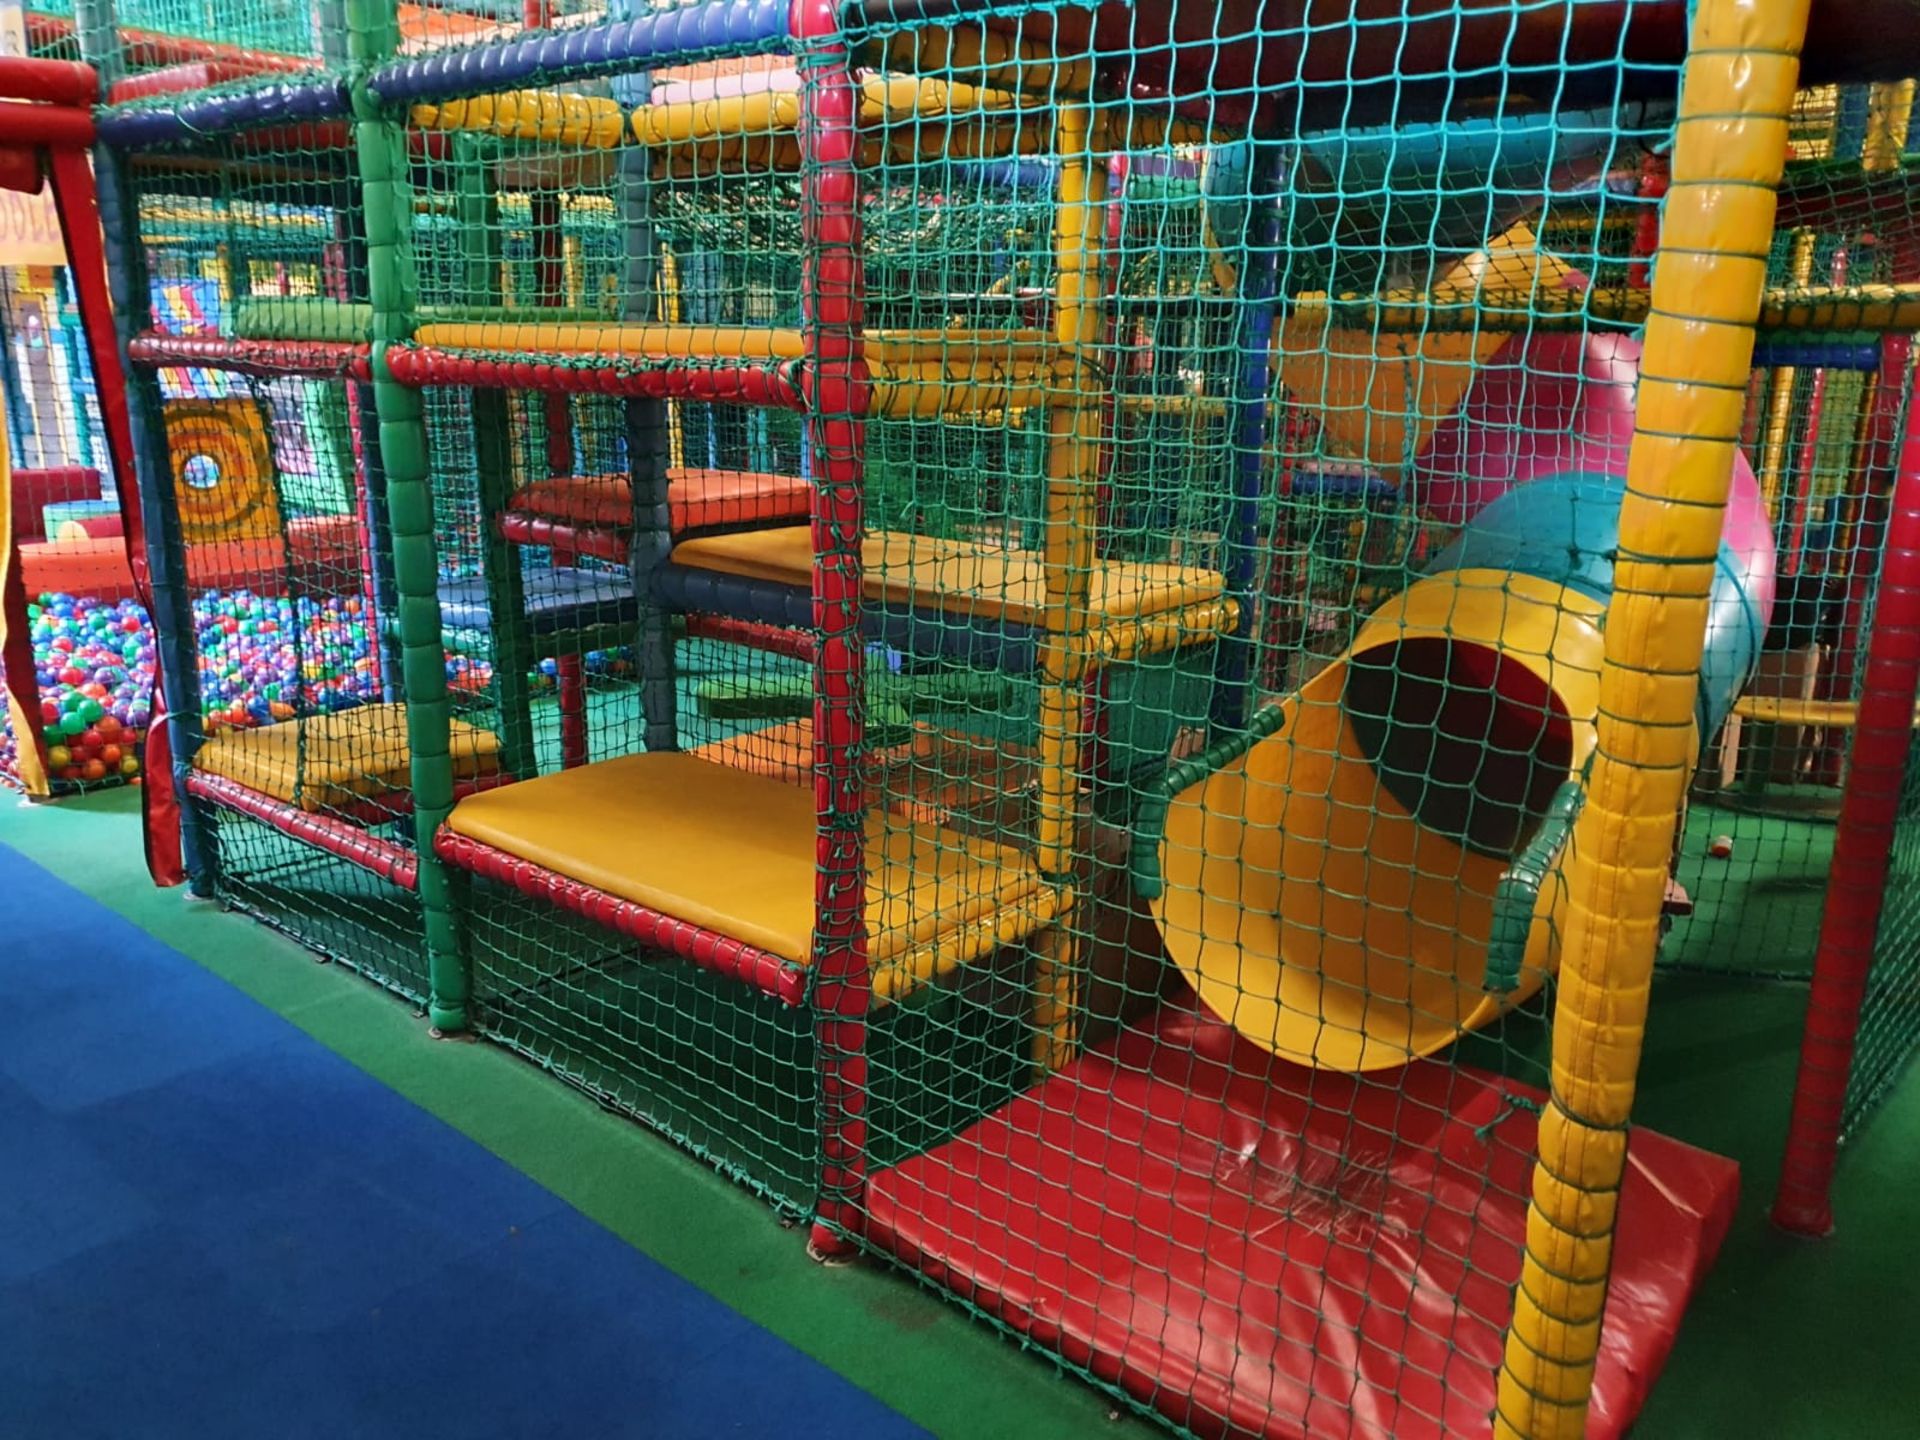 Bramleys Big Adventure Playground - Giant Action-Packed Playcentre With Slides, Zip Line Swings, - Image 110 of 128